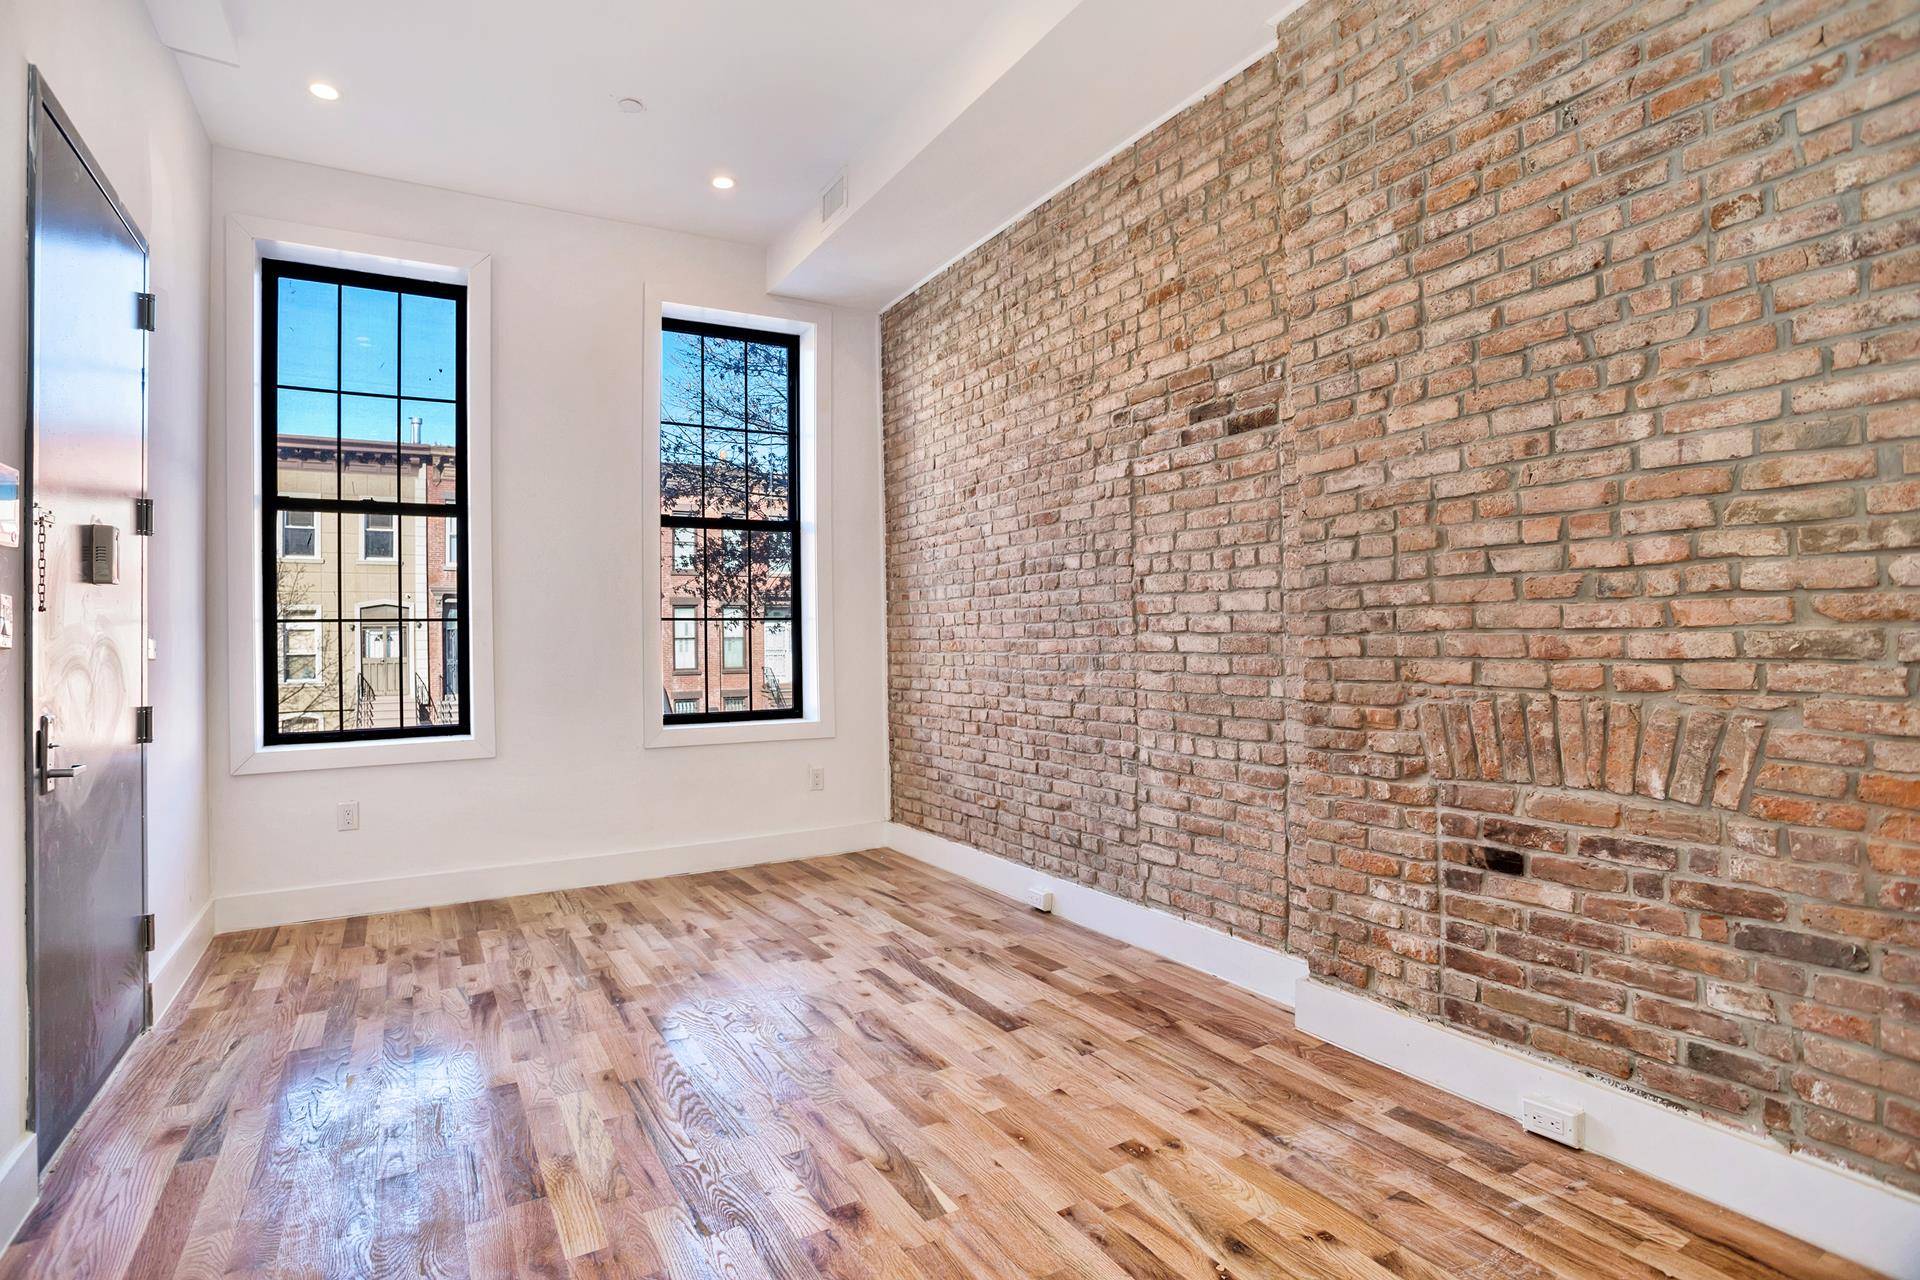 NO FEE Earliest Move In is July 1st Open House Saturday 12 00 1 00 Brand New renovation with Exposed Brick, Surround Sound, a Walk In Closet and Laundry In ...